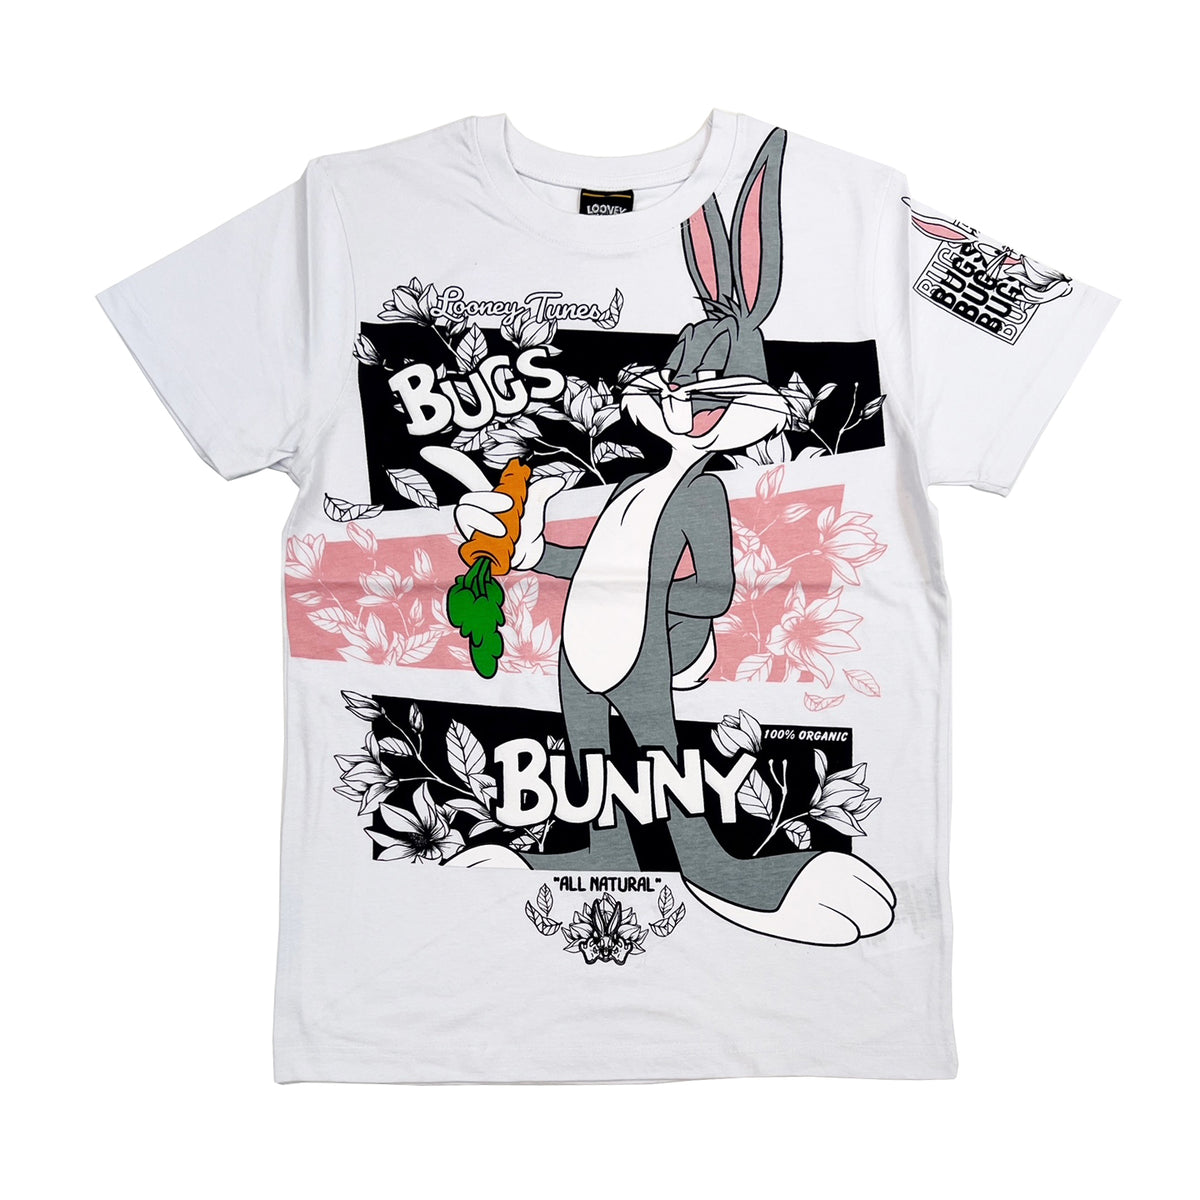 Looney Tunes Bugs Bunny Tee (White) $16.99 $30 / for 2